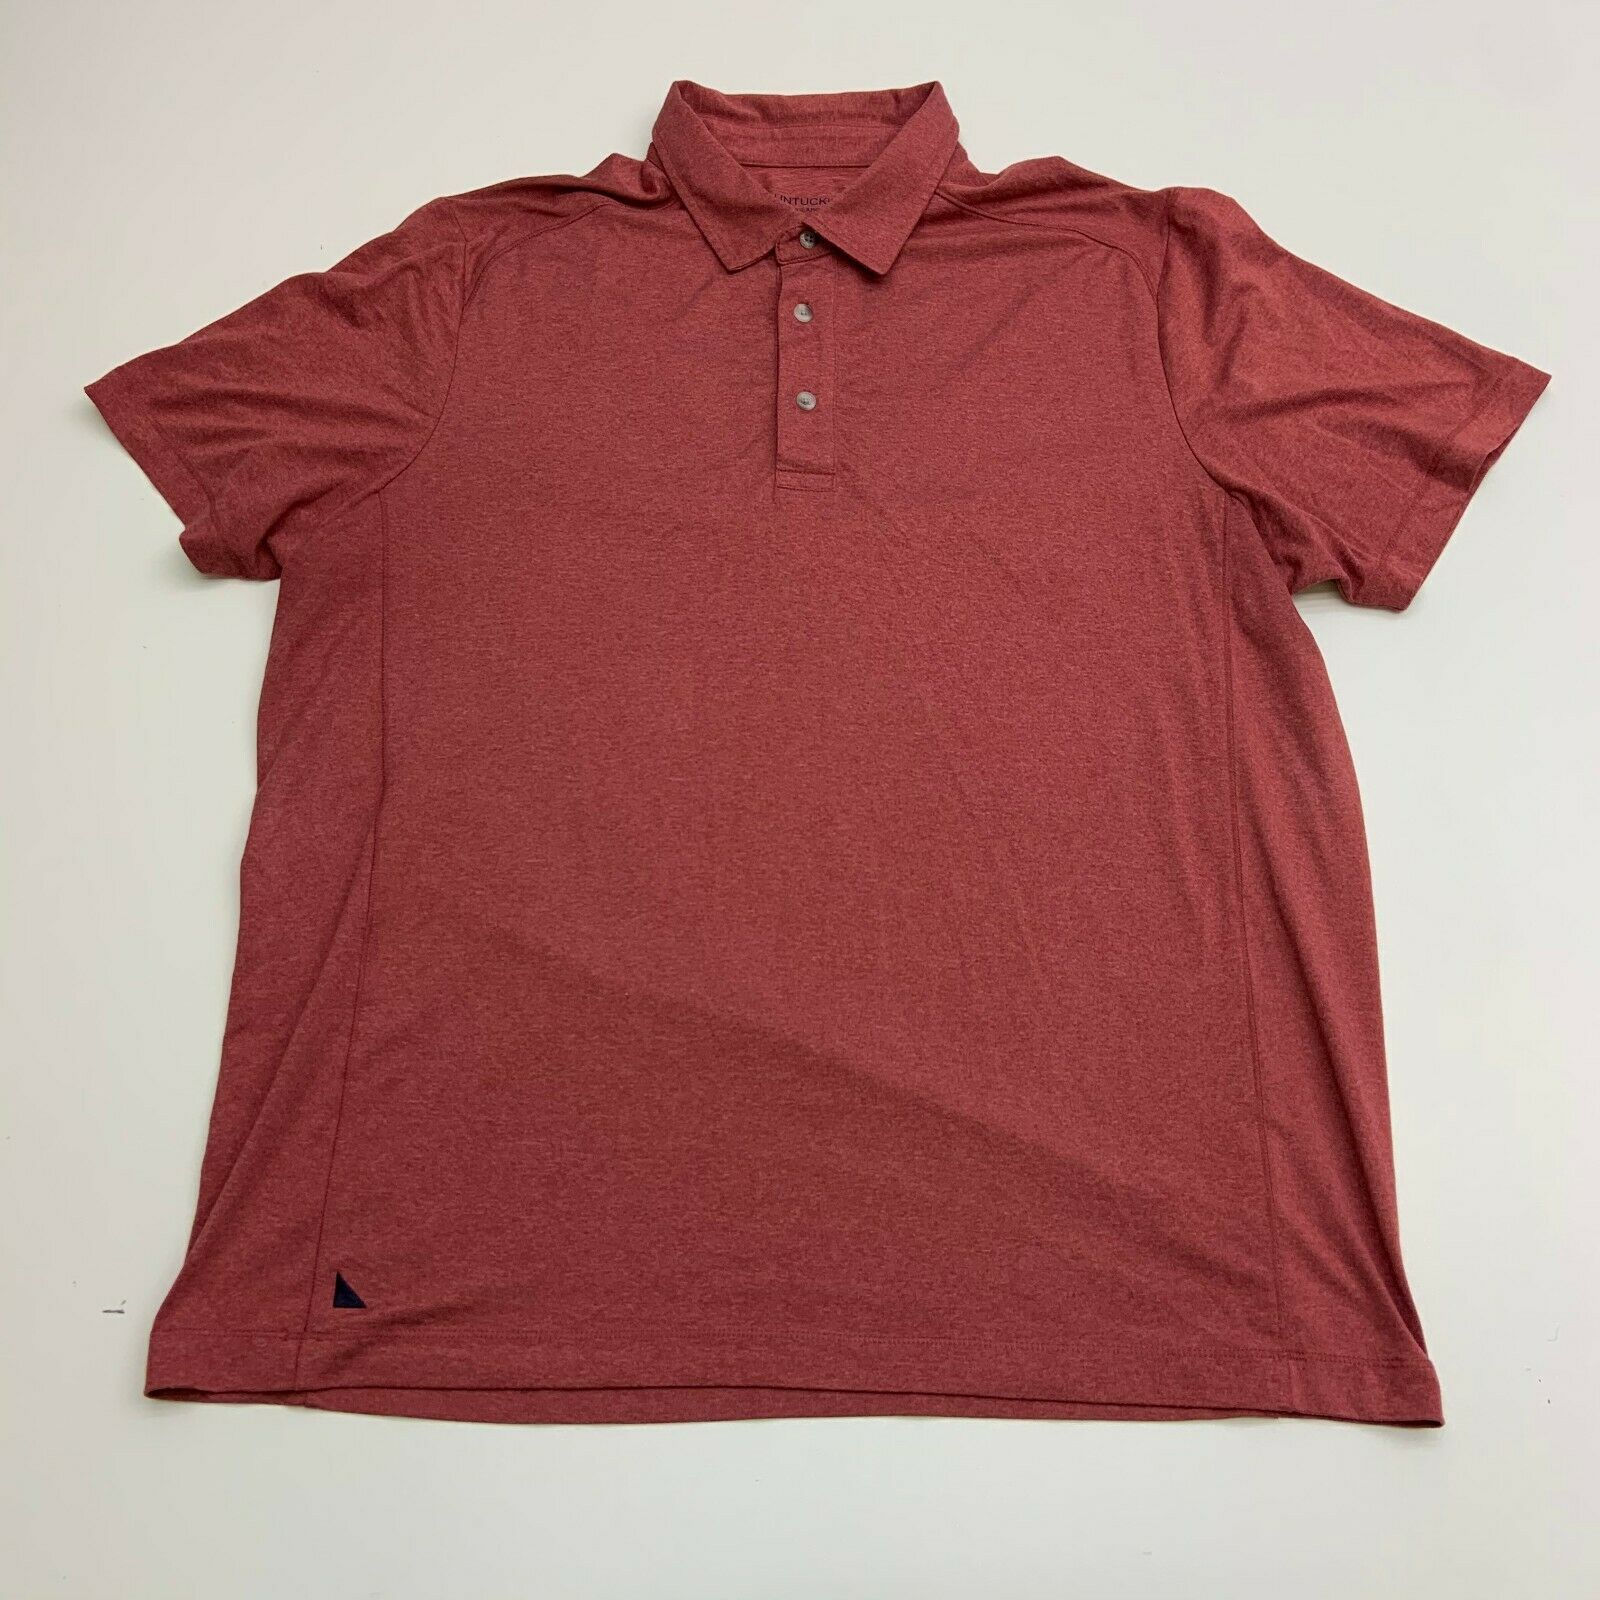 UNTUCKit Polo Shirt Mens XL Red Polyester Spandex Short Sleeve Casual ...